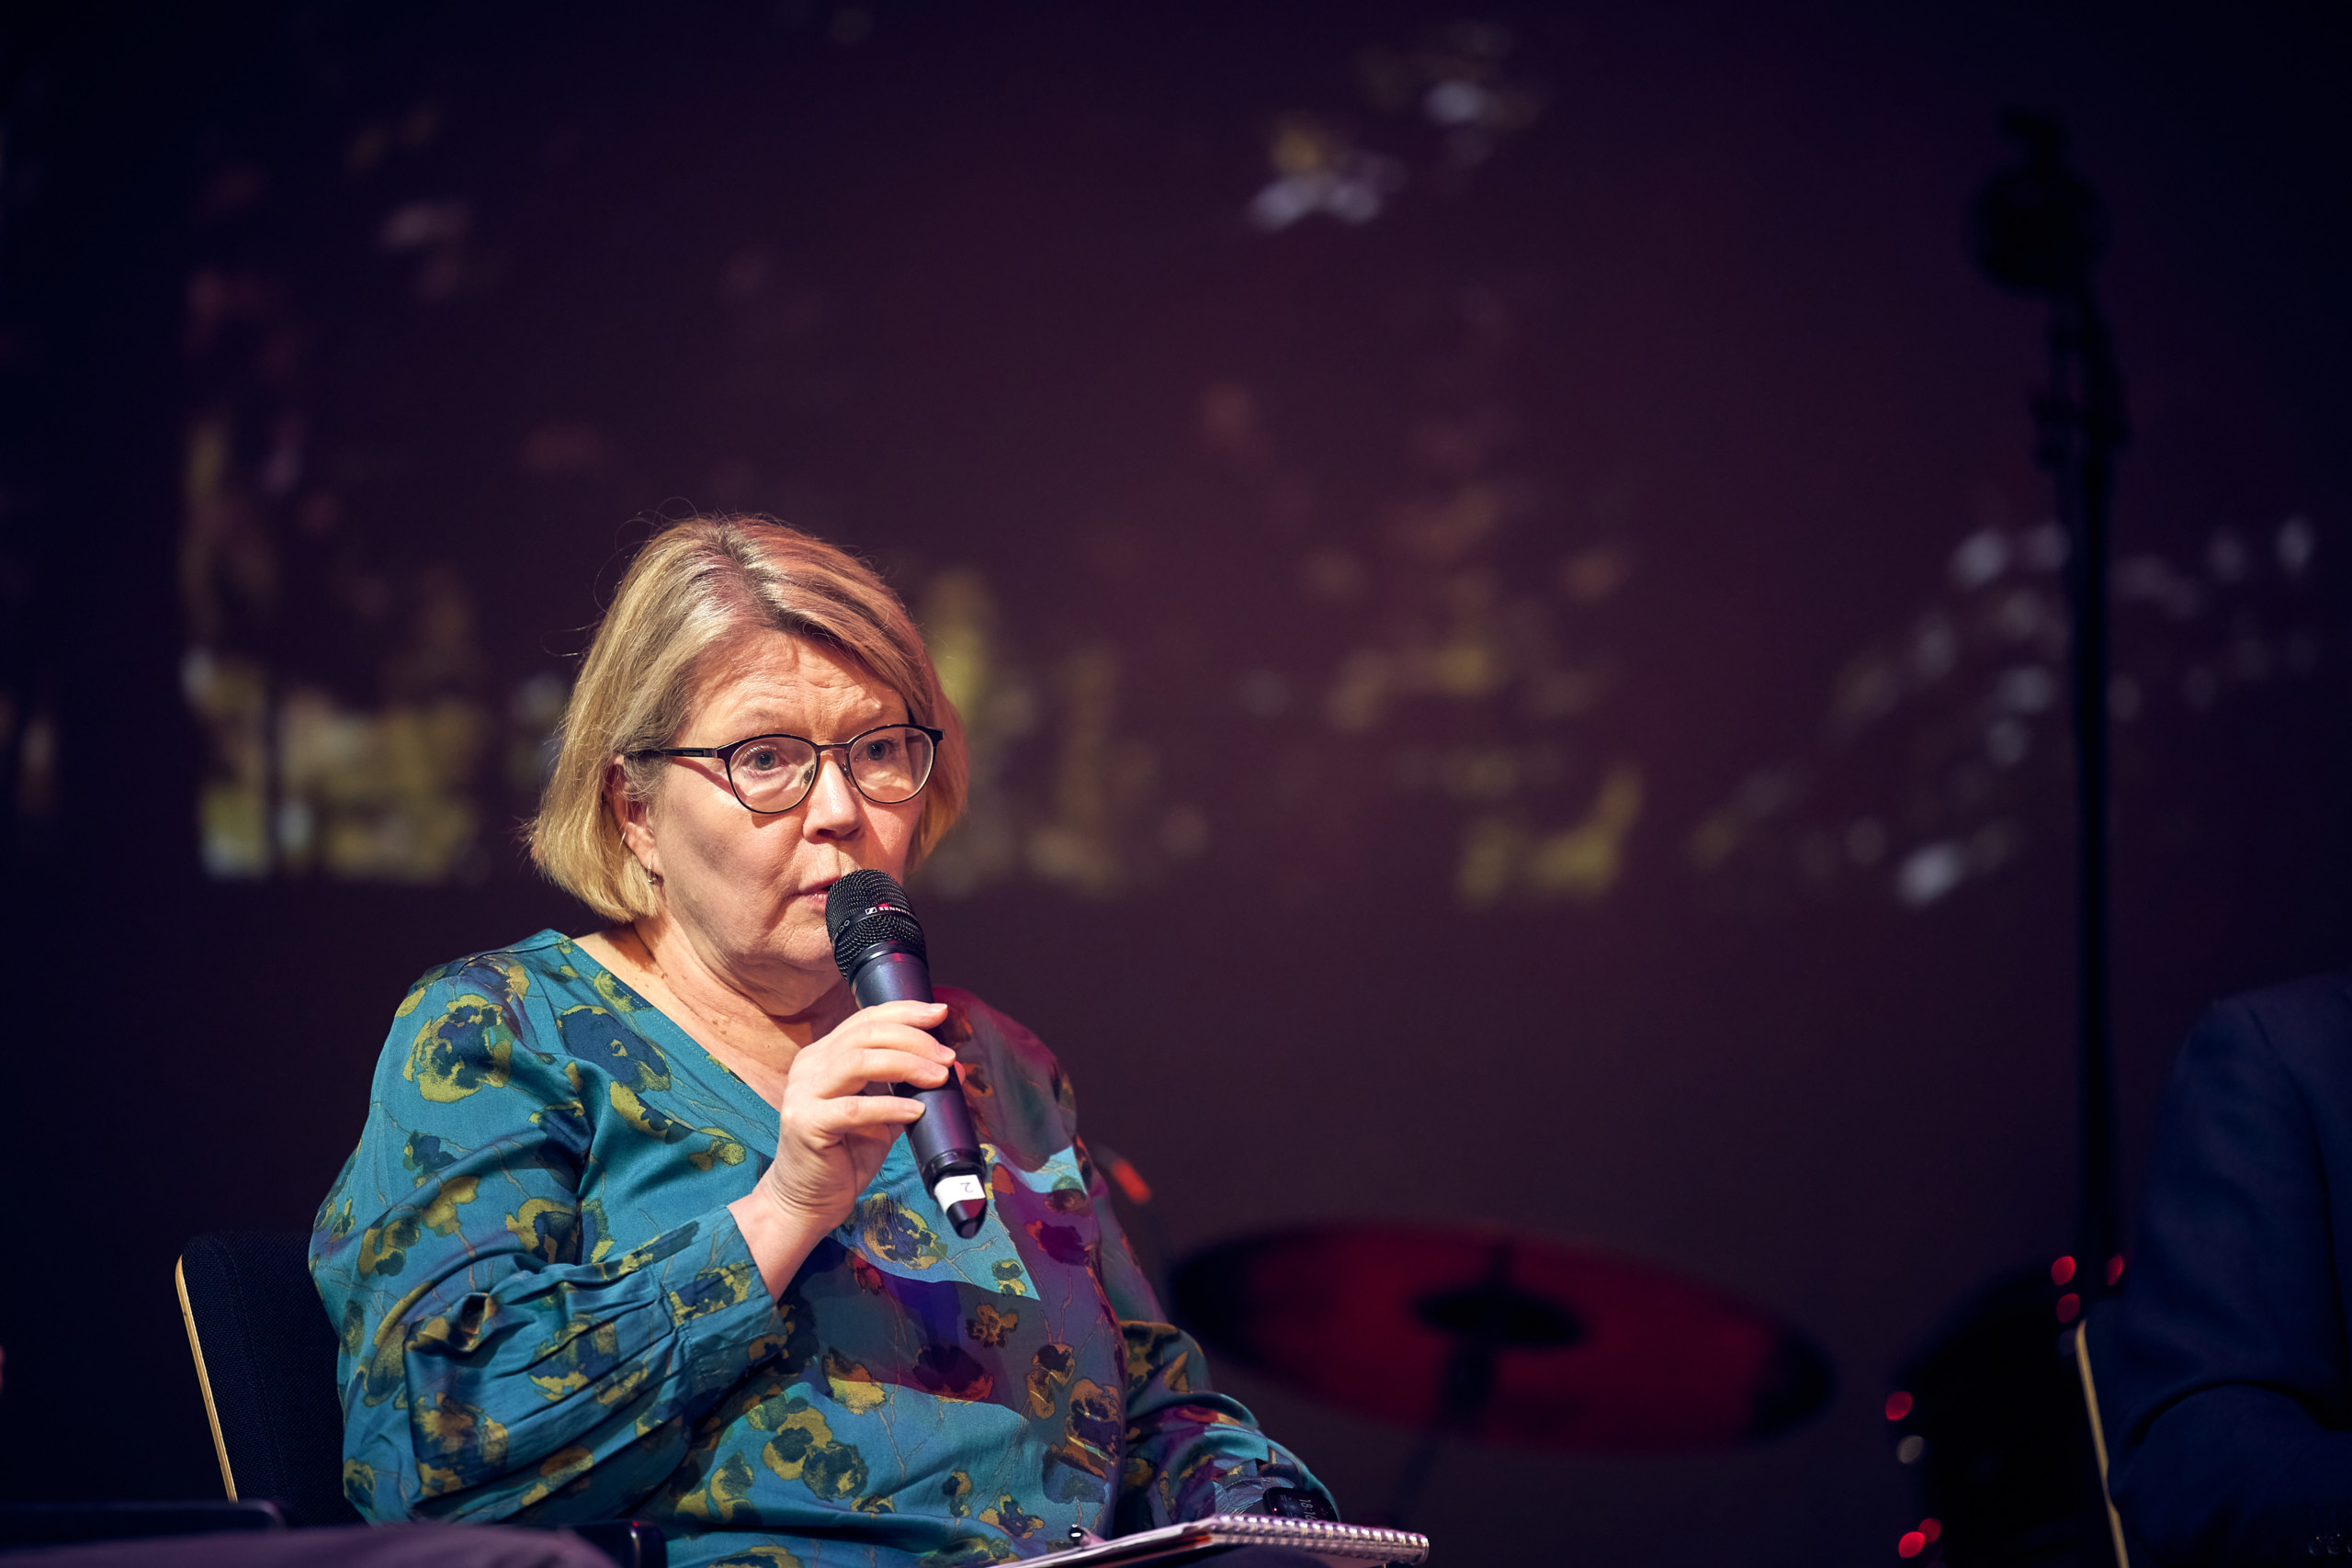 A woman in glasses speaking to a microphone.